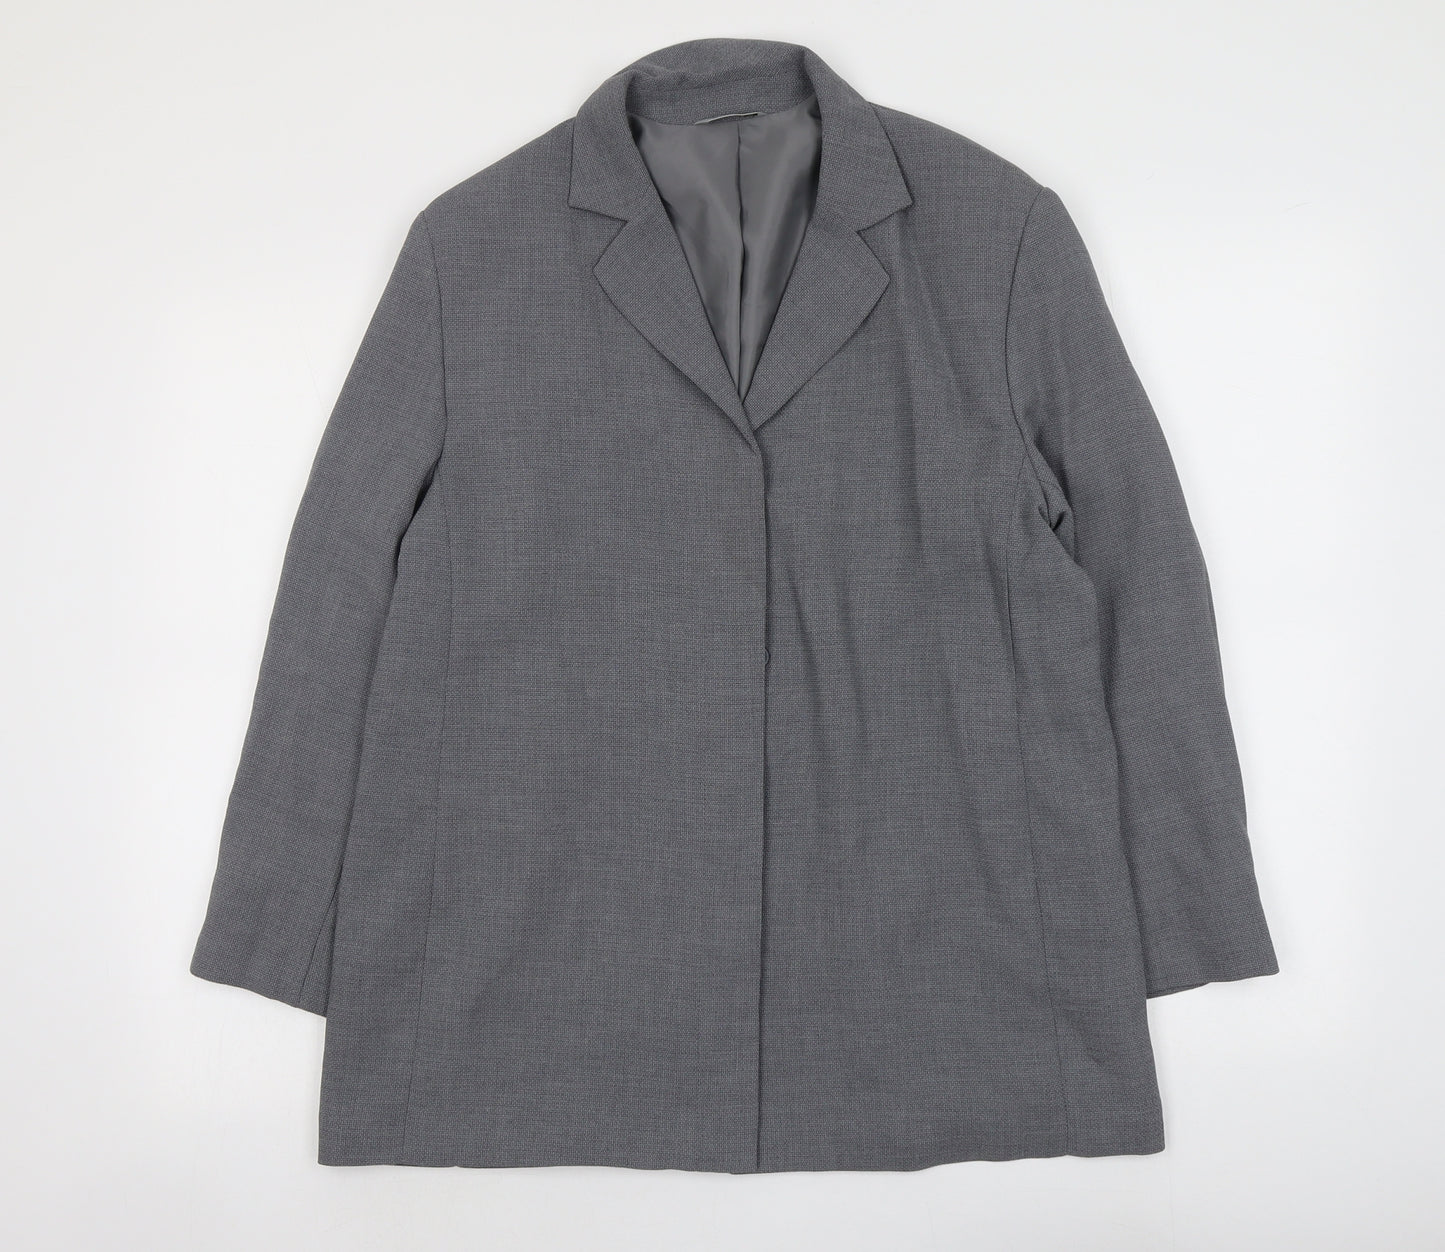 Marks and Spencer Womens Grey Polyester Jacket Blazer Size 16